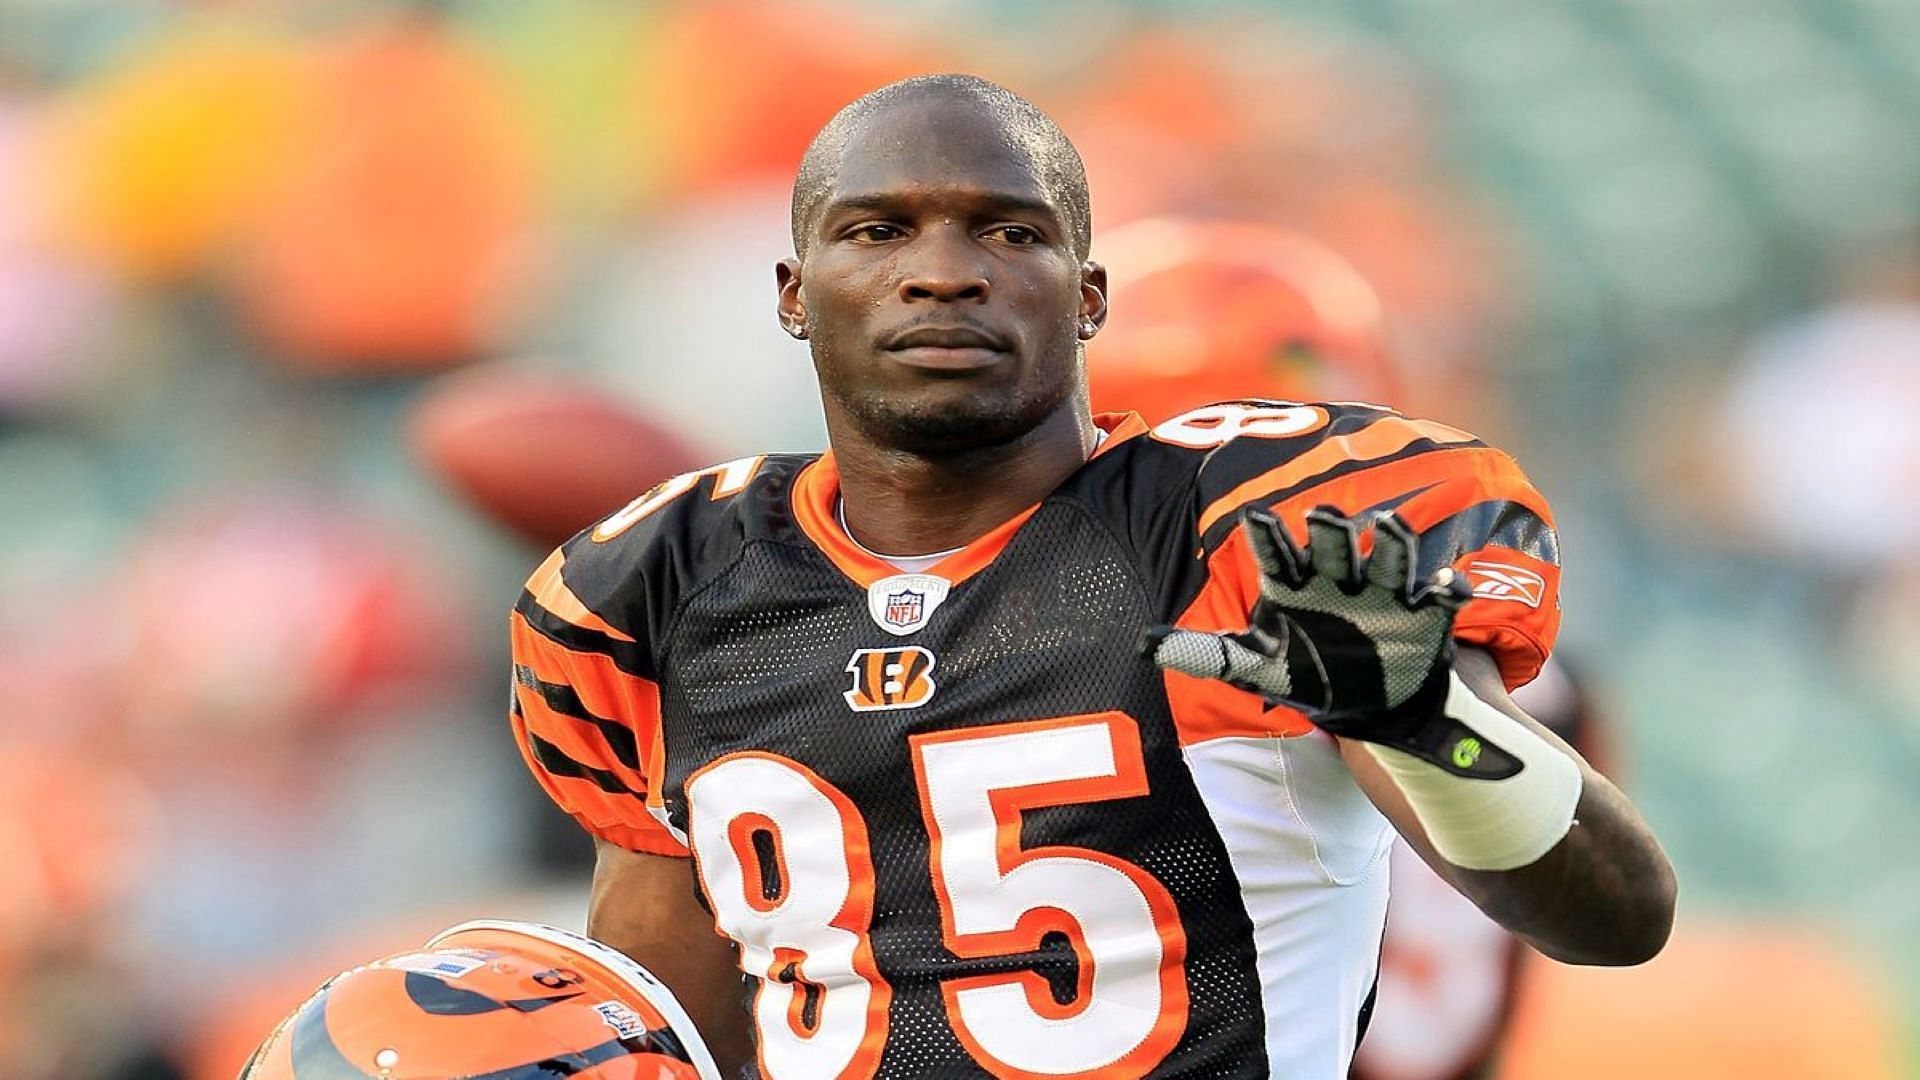 Bengals' Legend Chad Johnson belongs in the Pro Football Hall of Fame